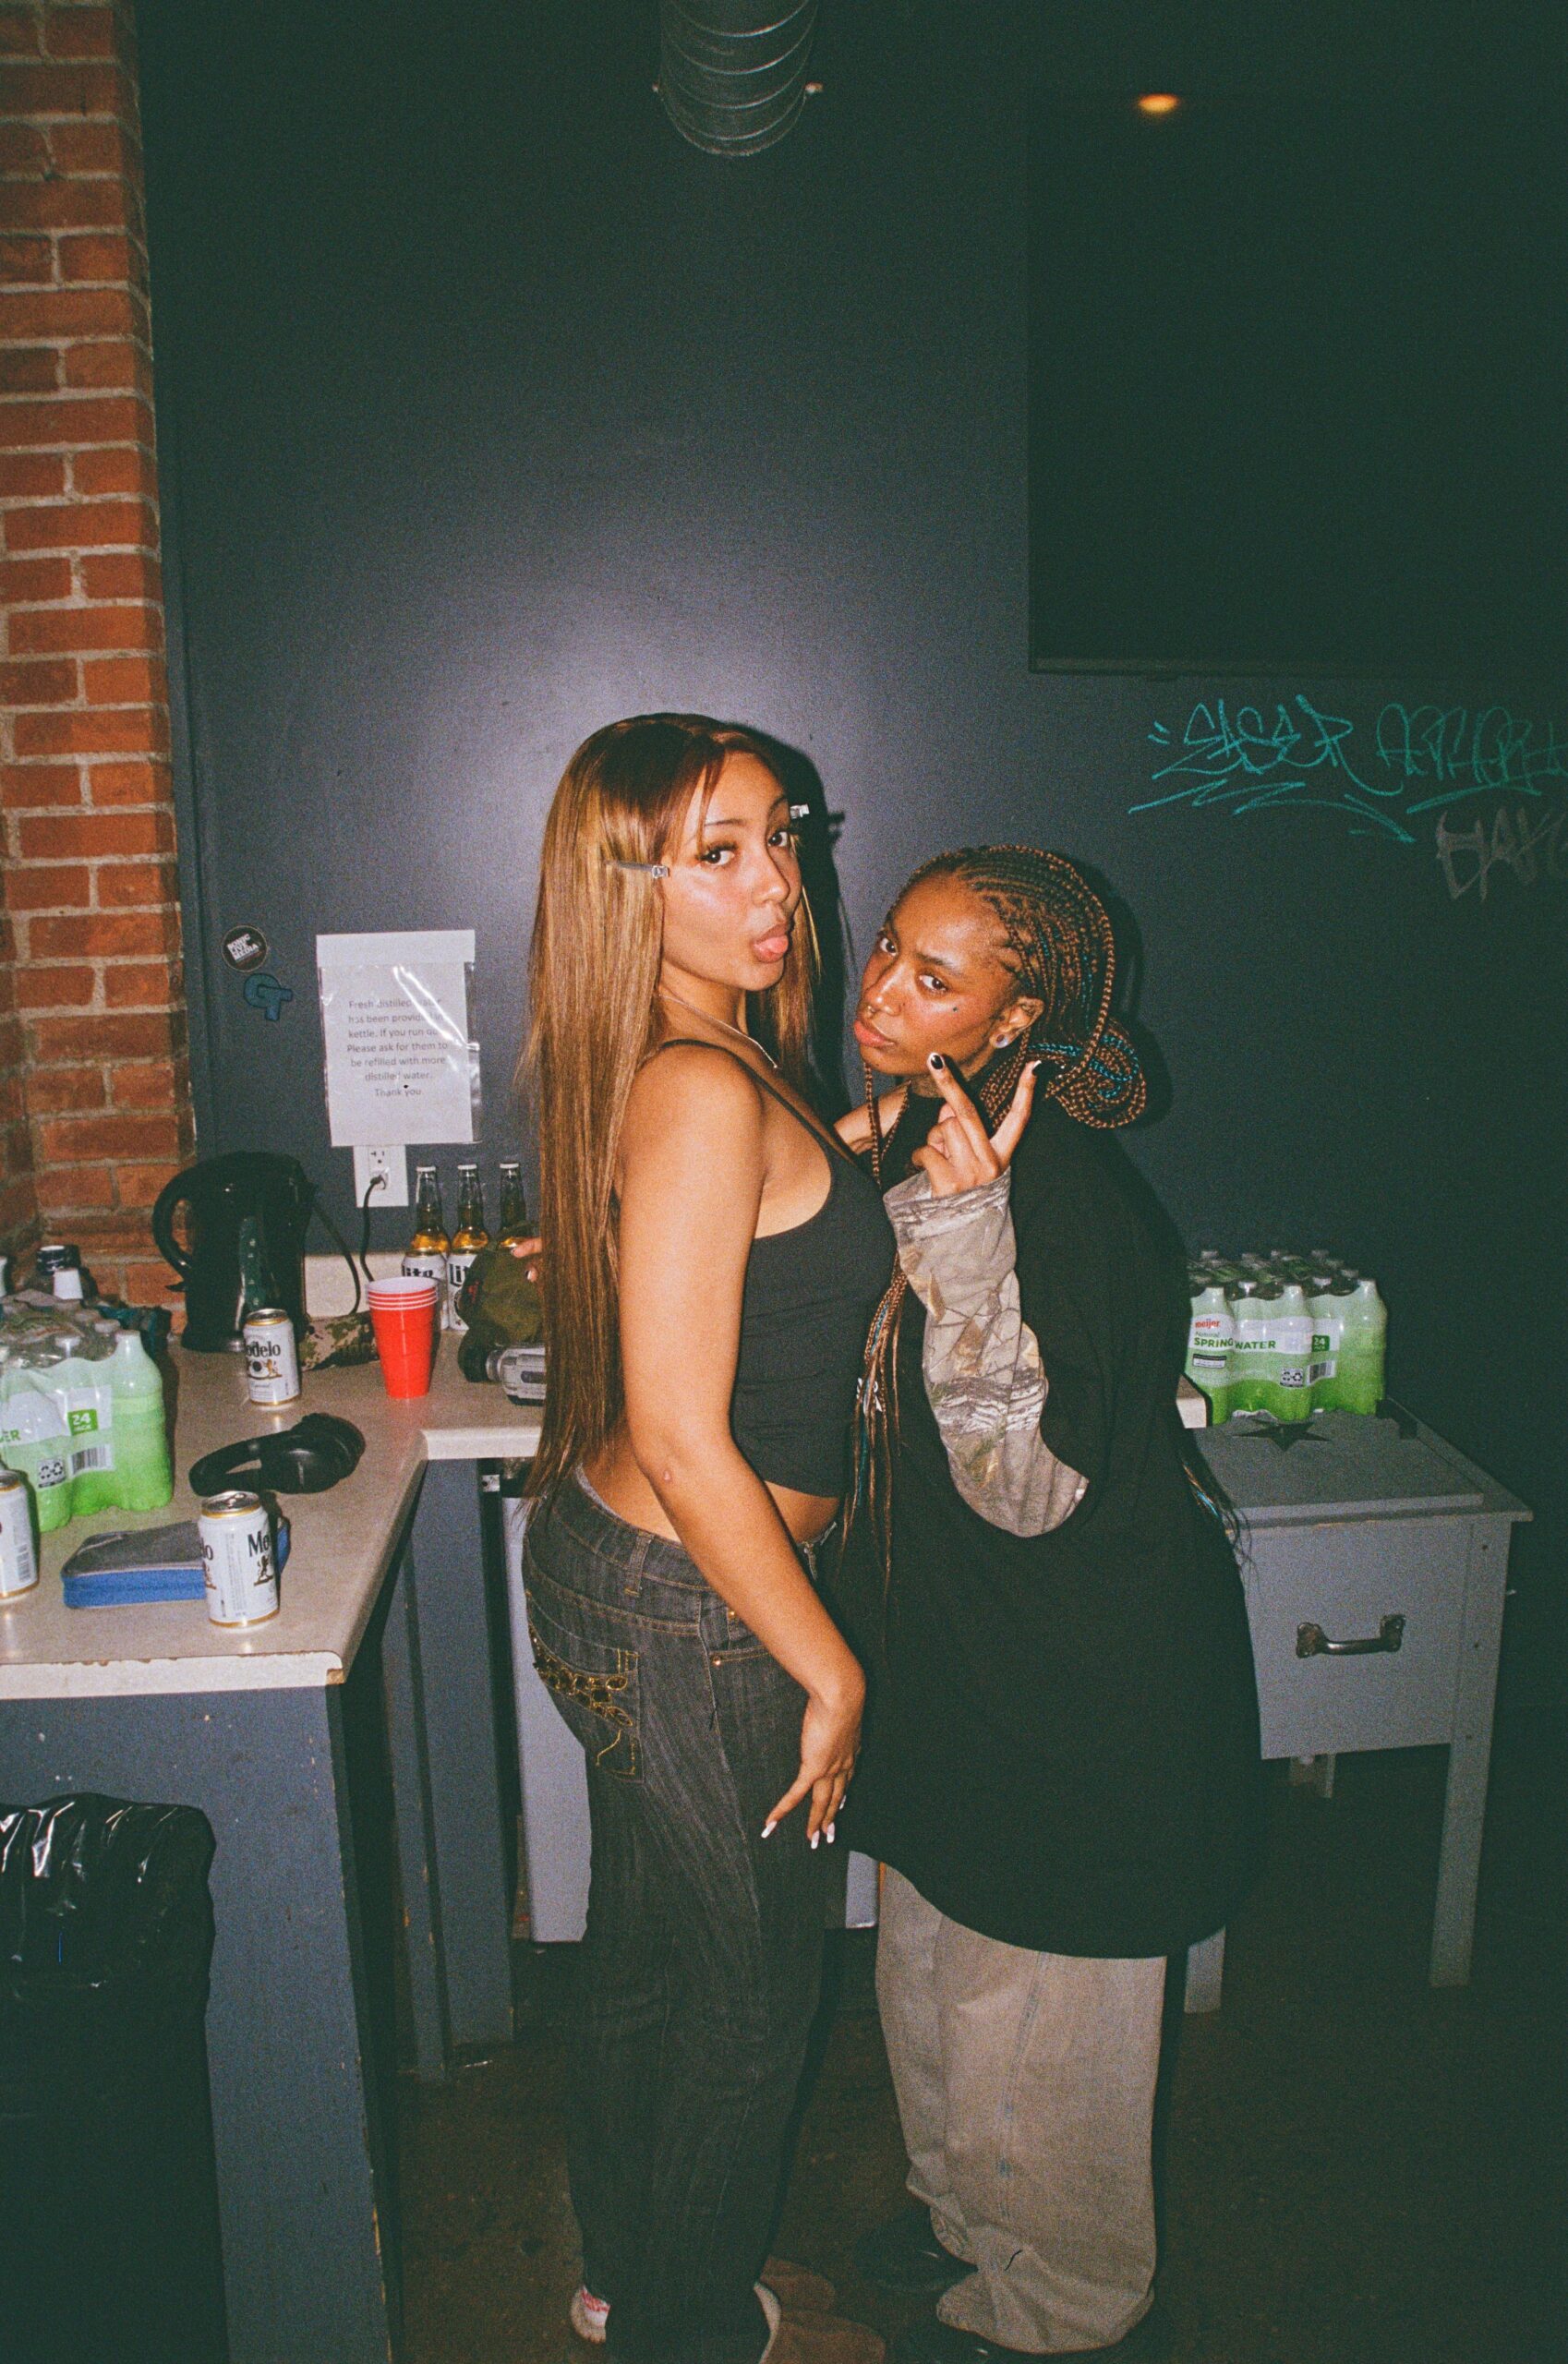 Bktherula Shares Her PinkPantheress ‘Capable Of Love’ Tour Photo Diary